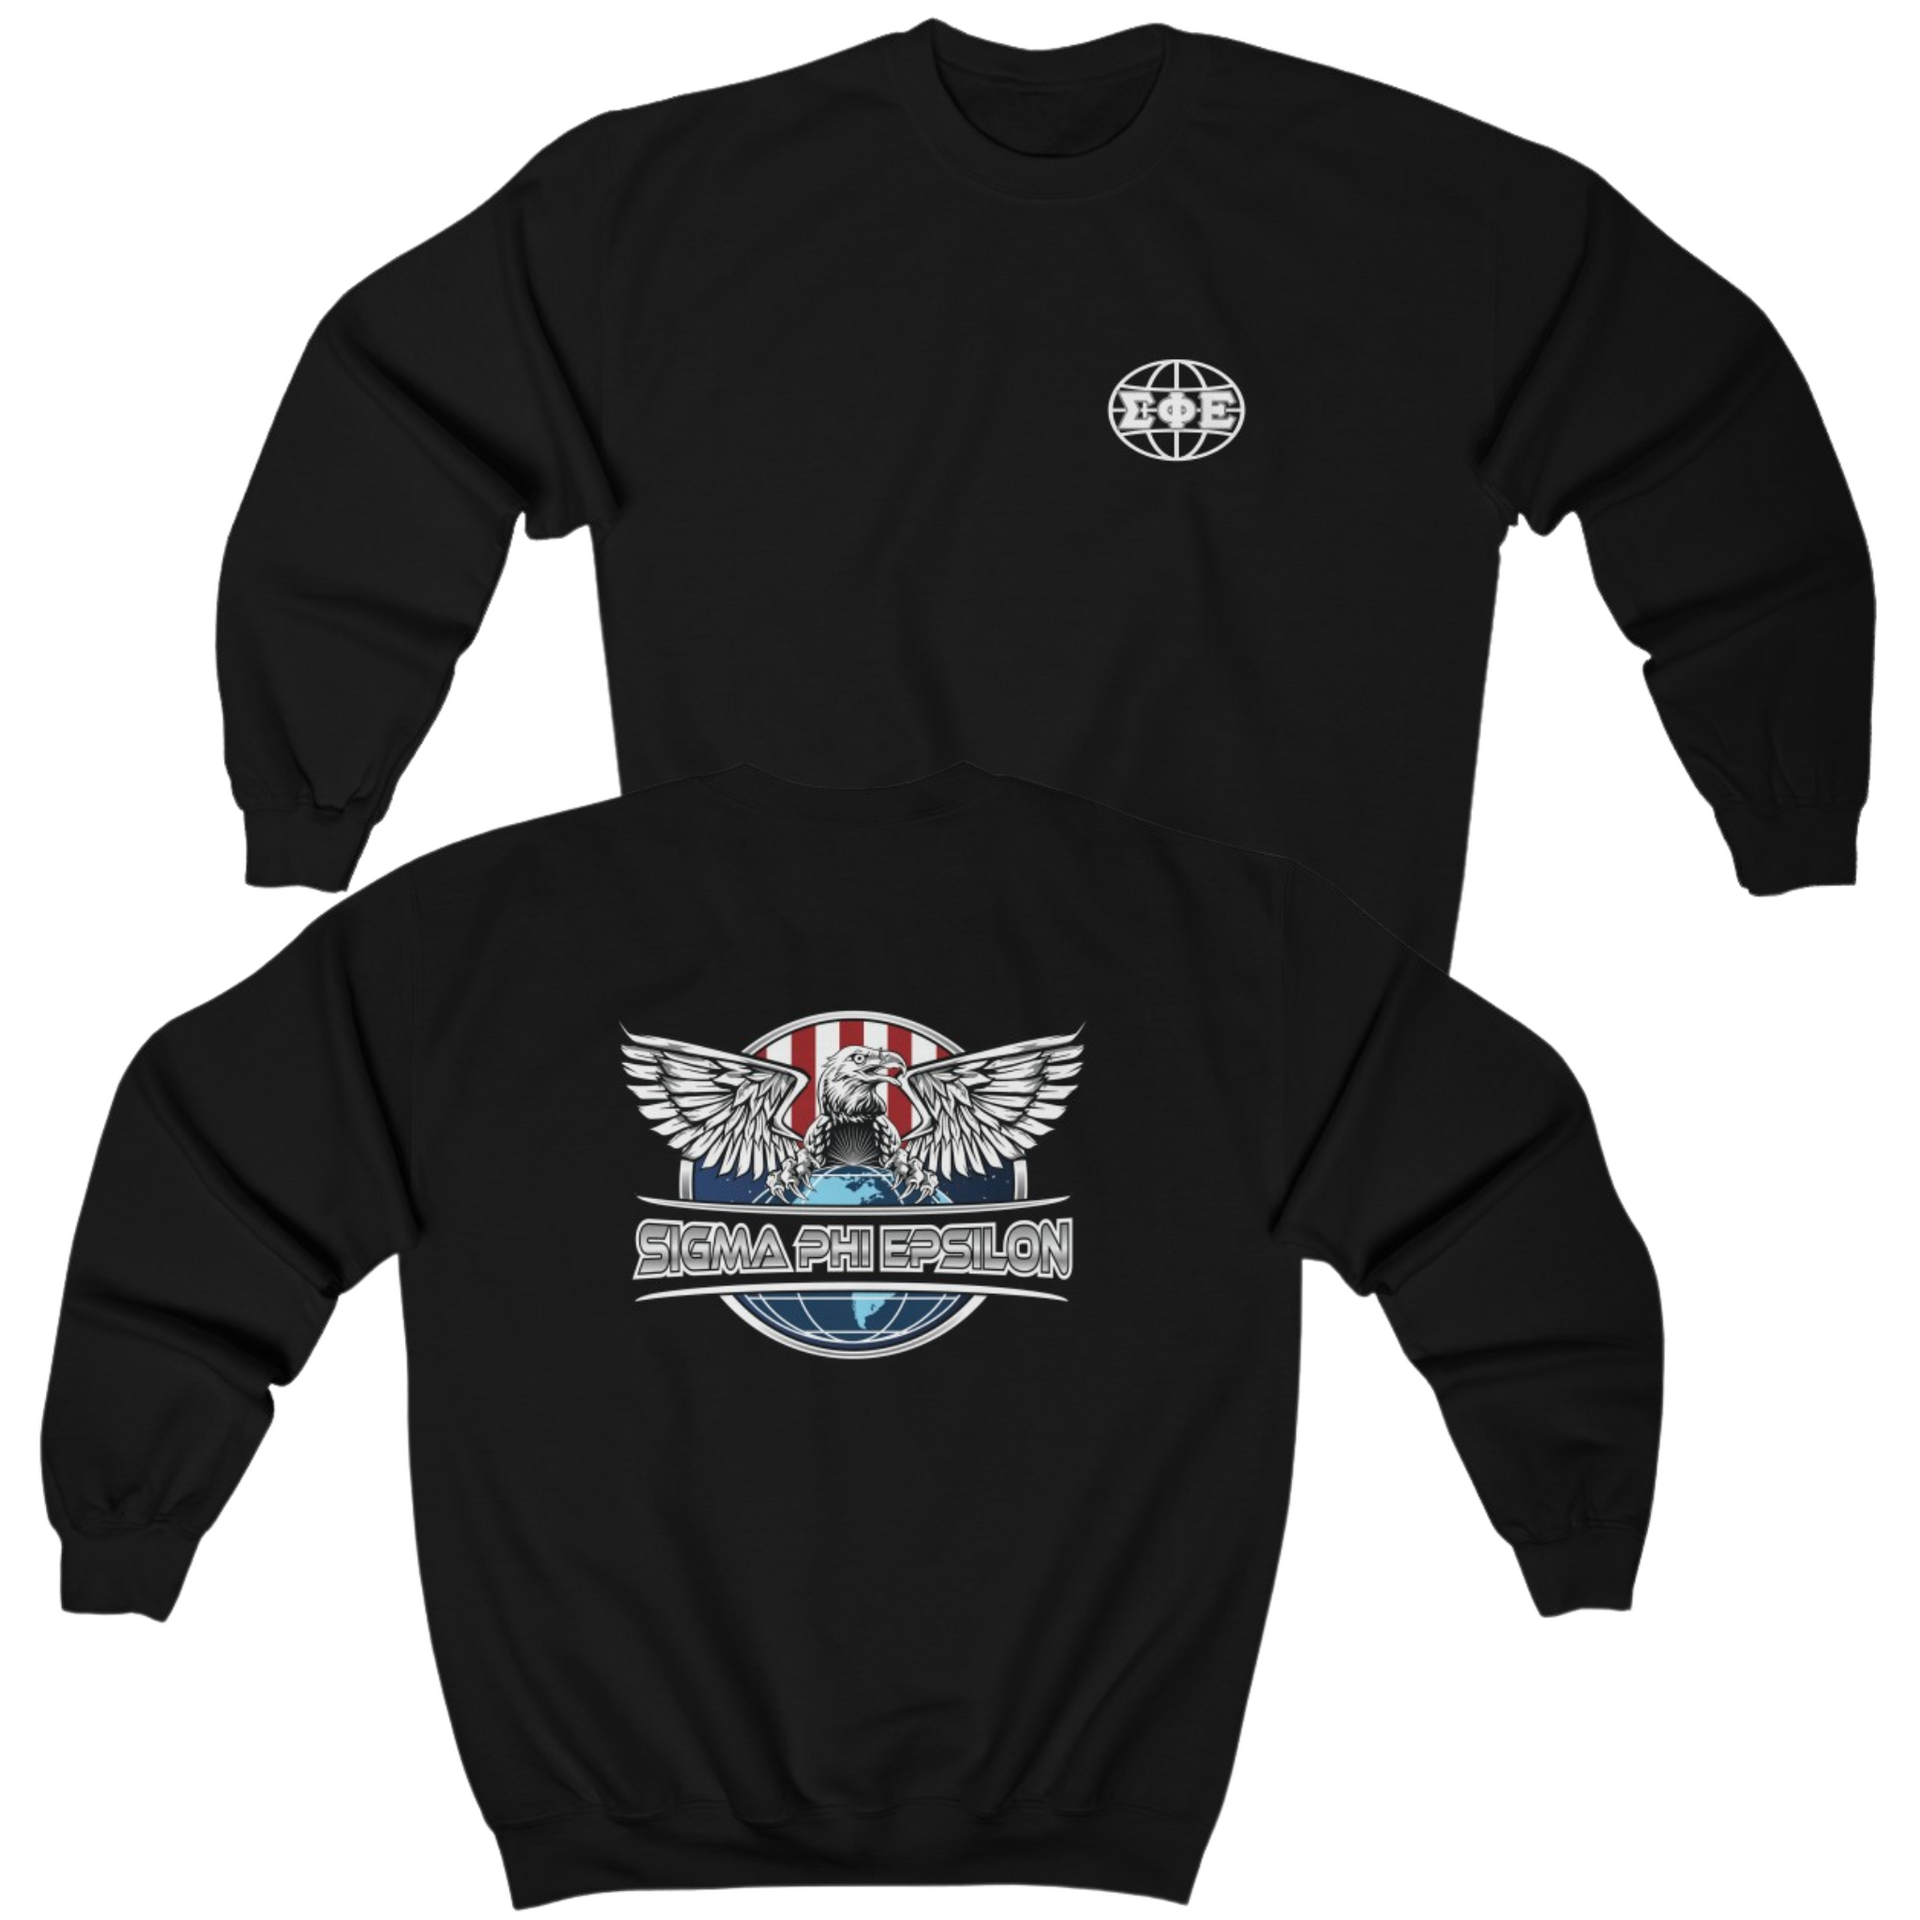 Black Sigma Phi Epsilon Graphic Crewneck Sweatshirt | The Fraternal Order | SigEp Fraternity Clothes and Merchandise 